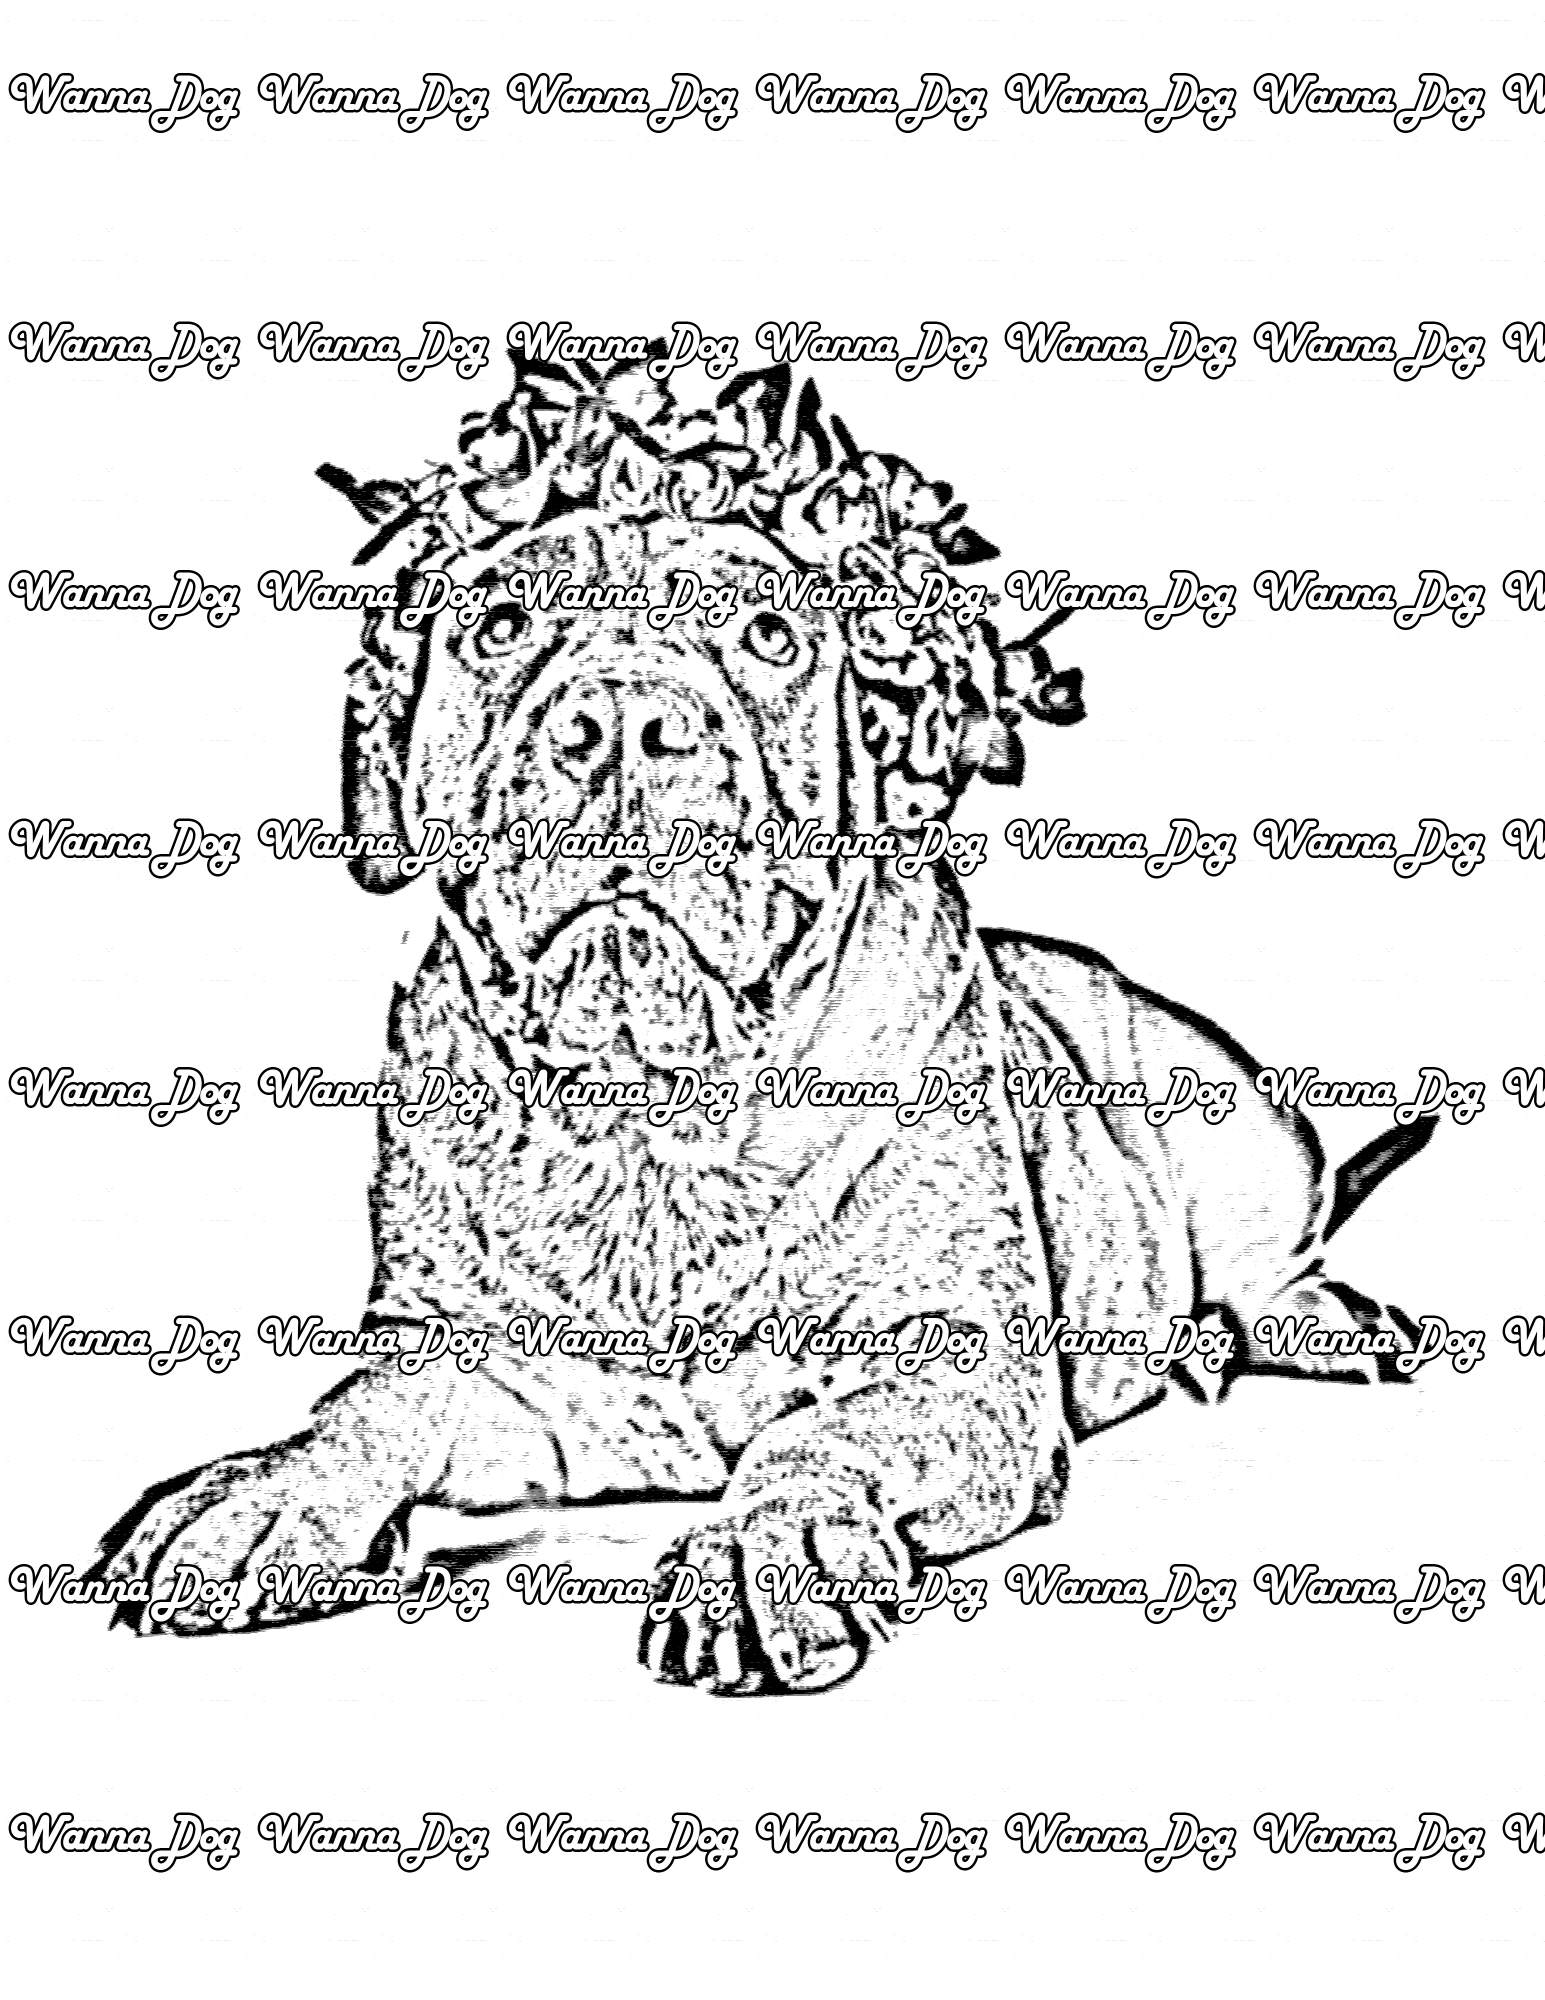 Mastiff Coloring Page of a Mastiff wearing a flower crown